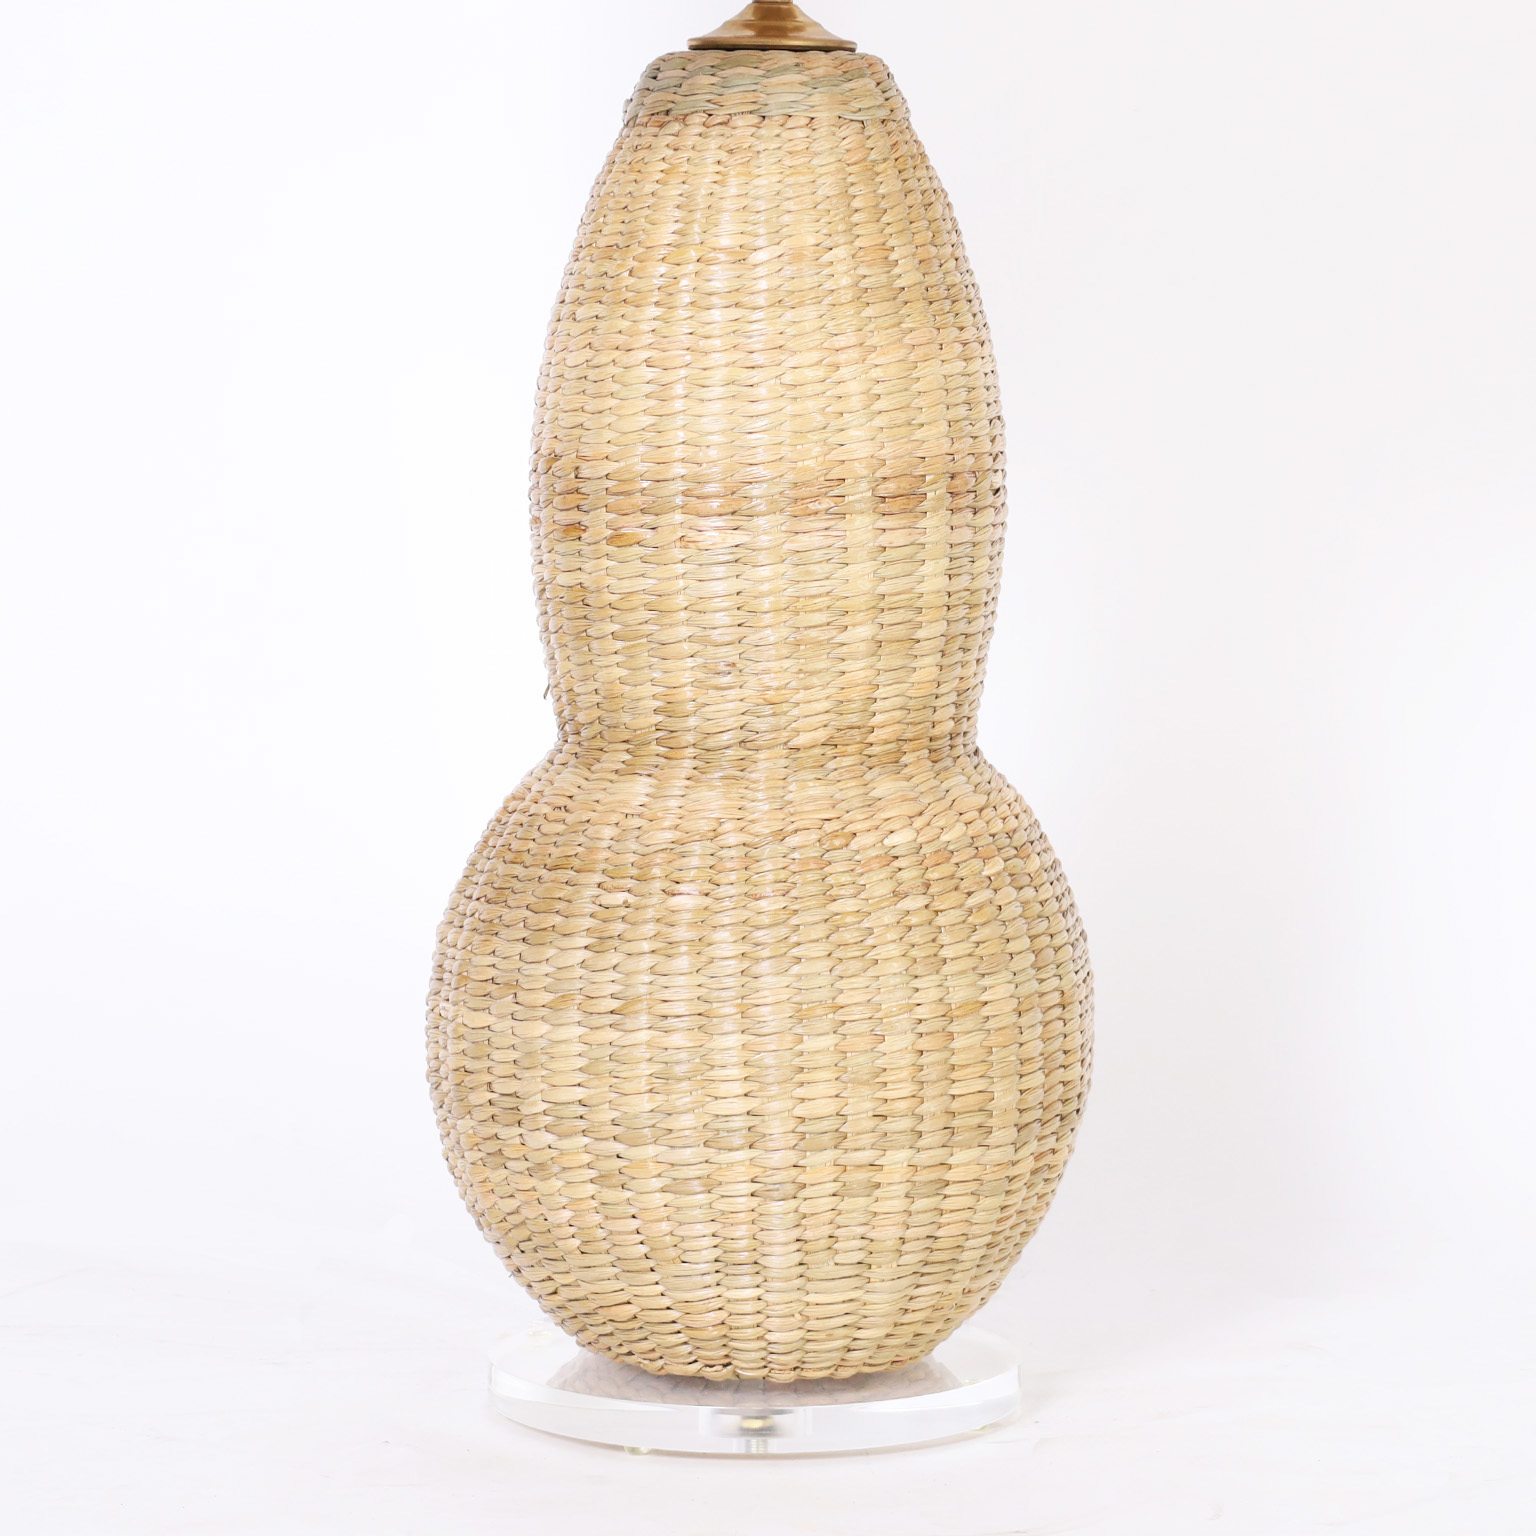 Pair of Woven Reed Table Lamps from the FS Flores Collection